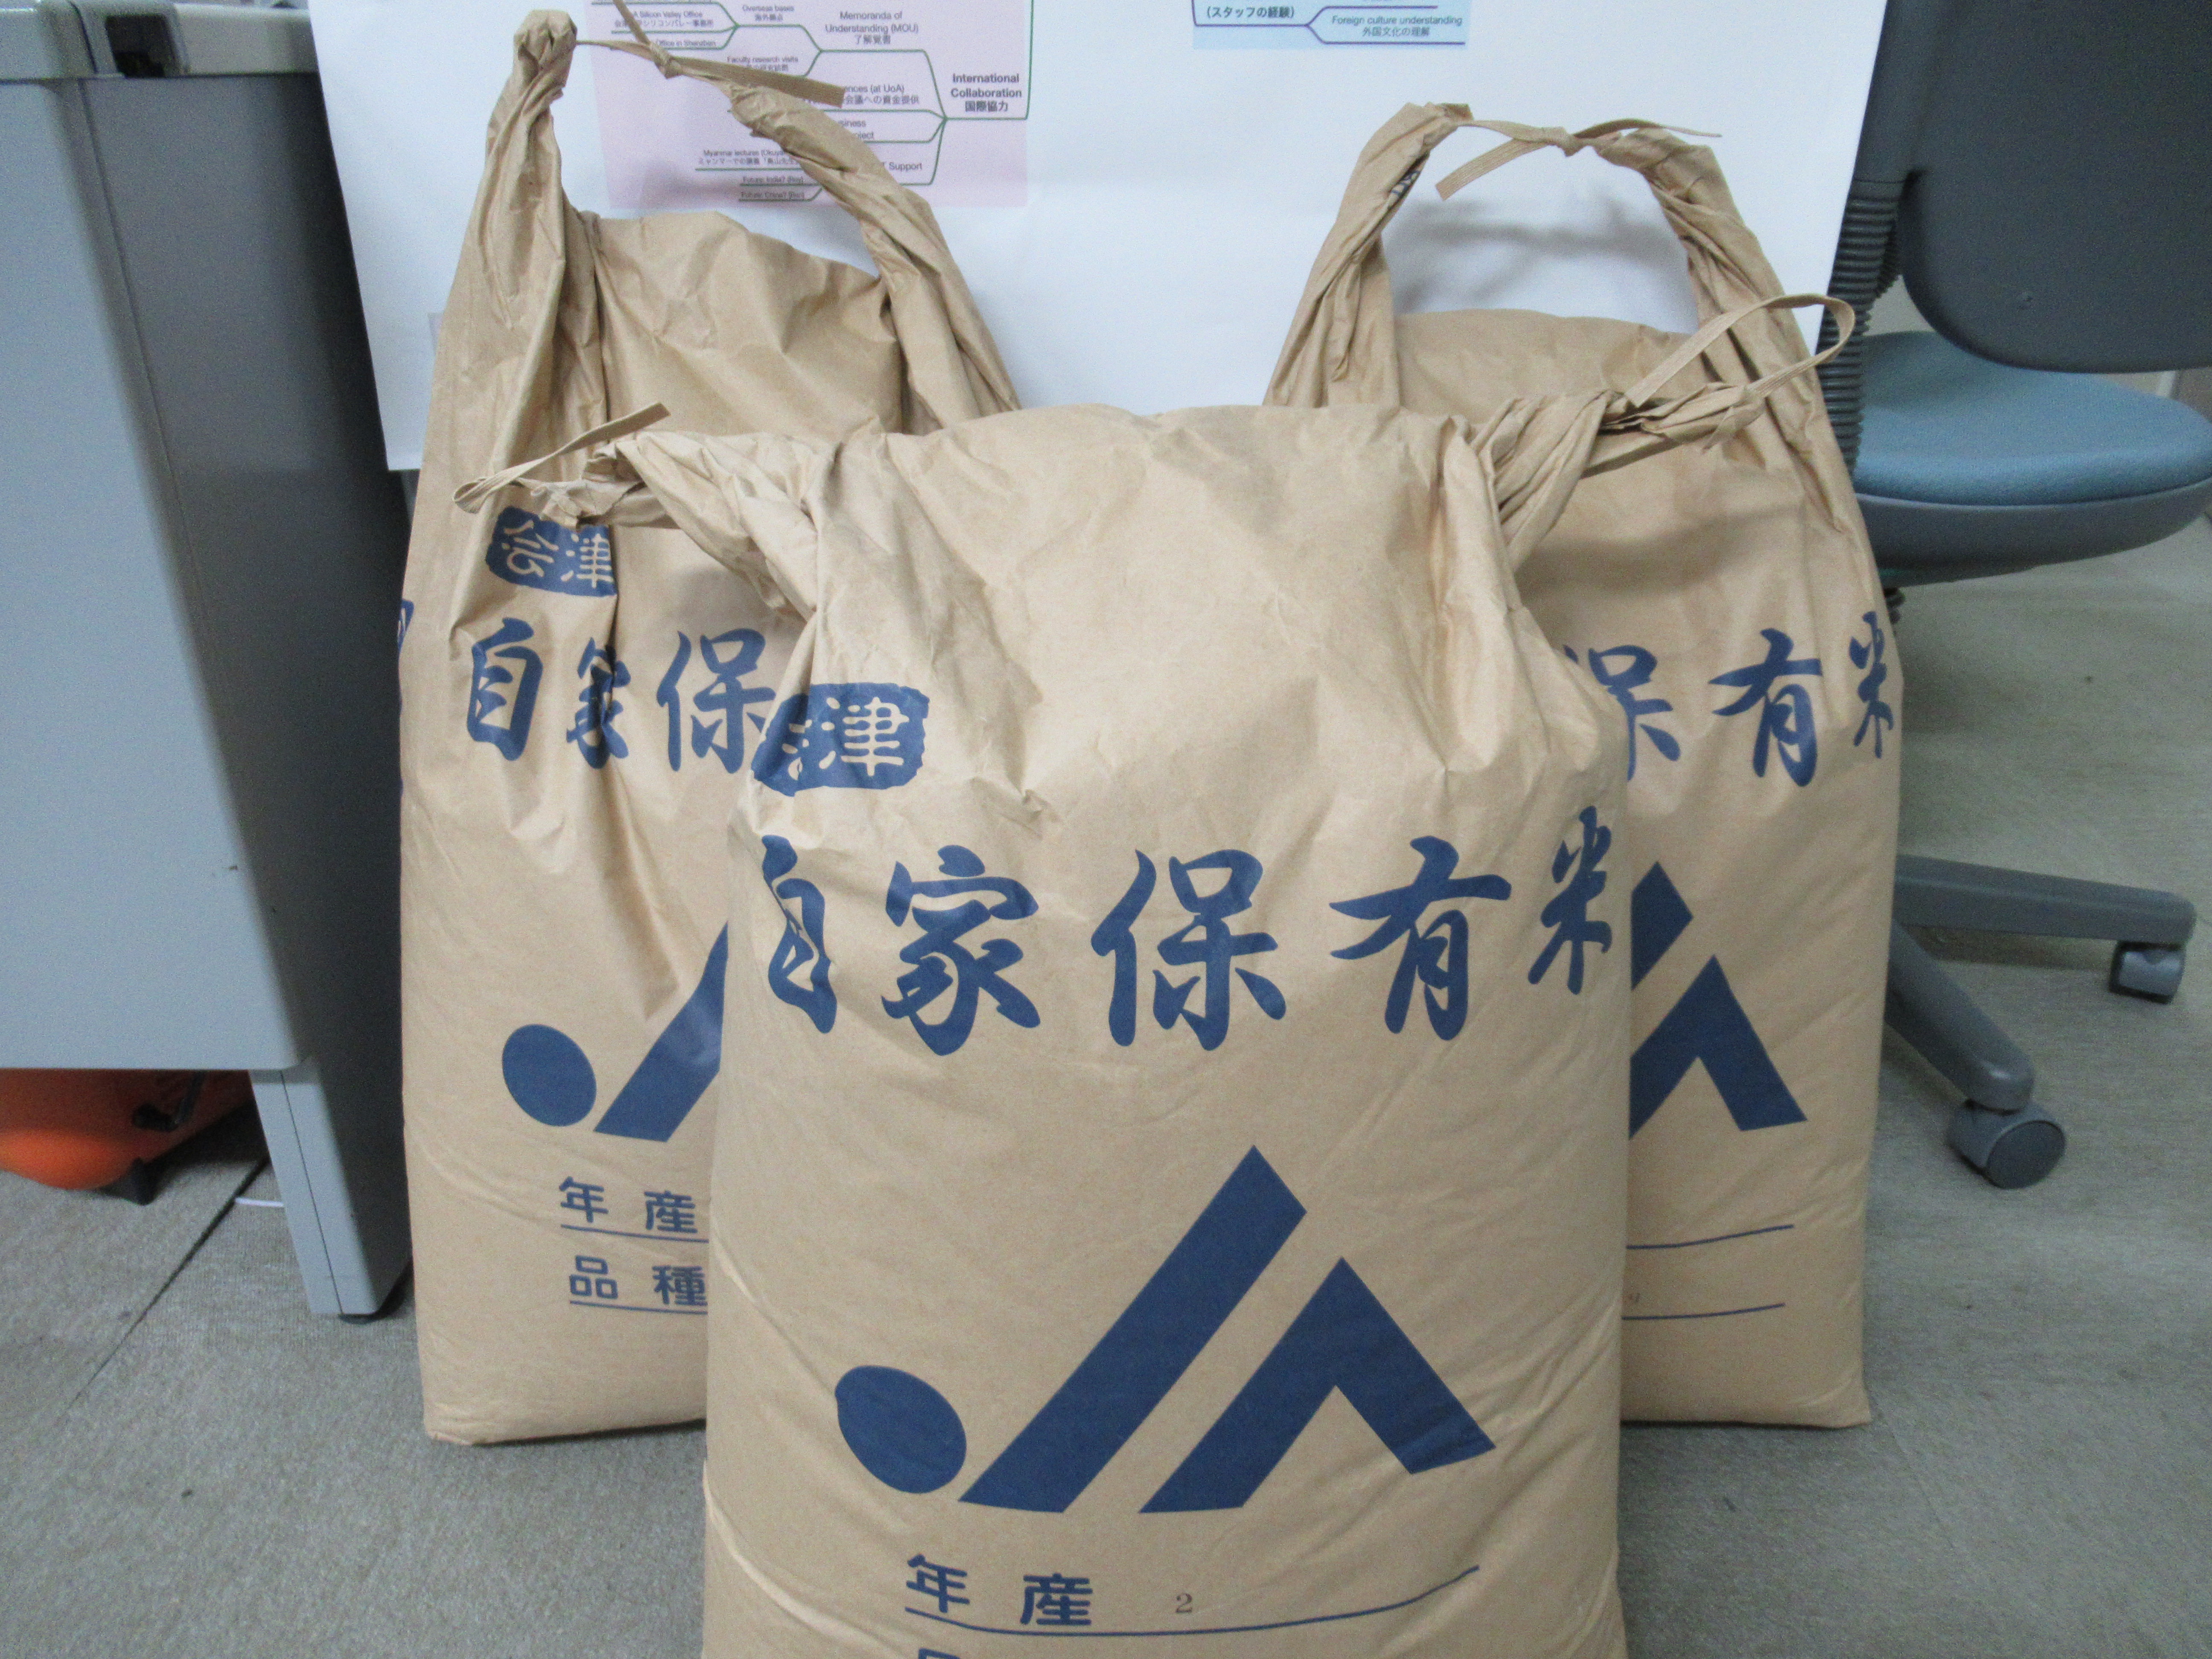 MS. Takahashi donated rice to the international students